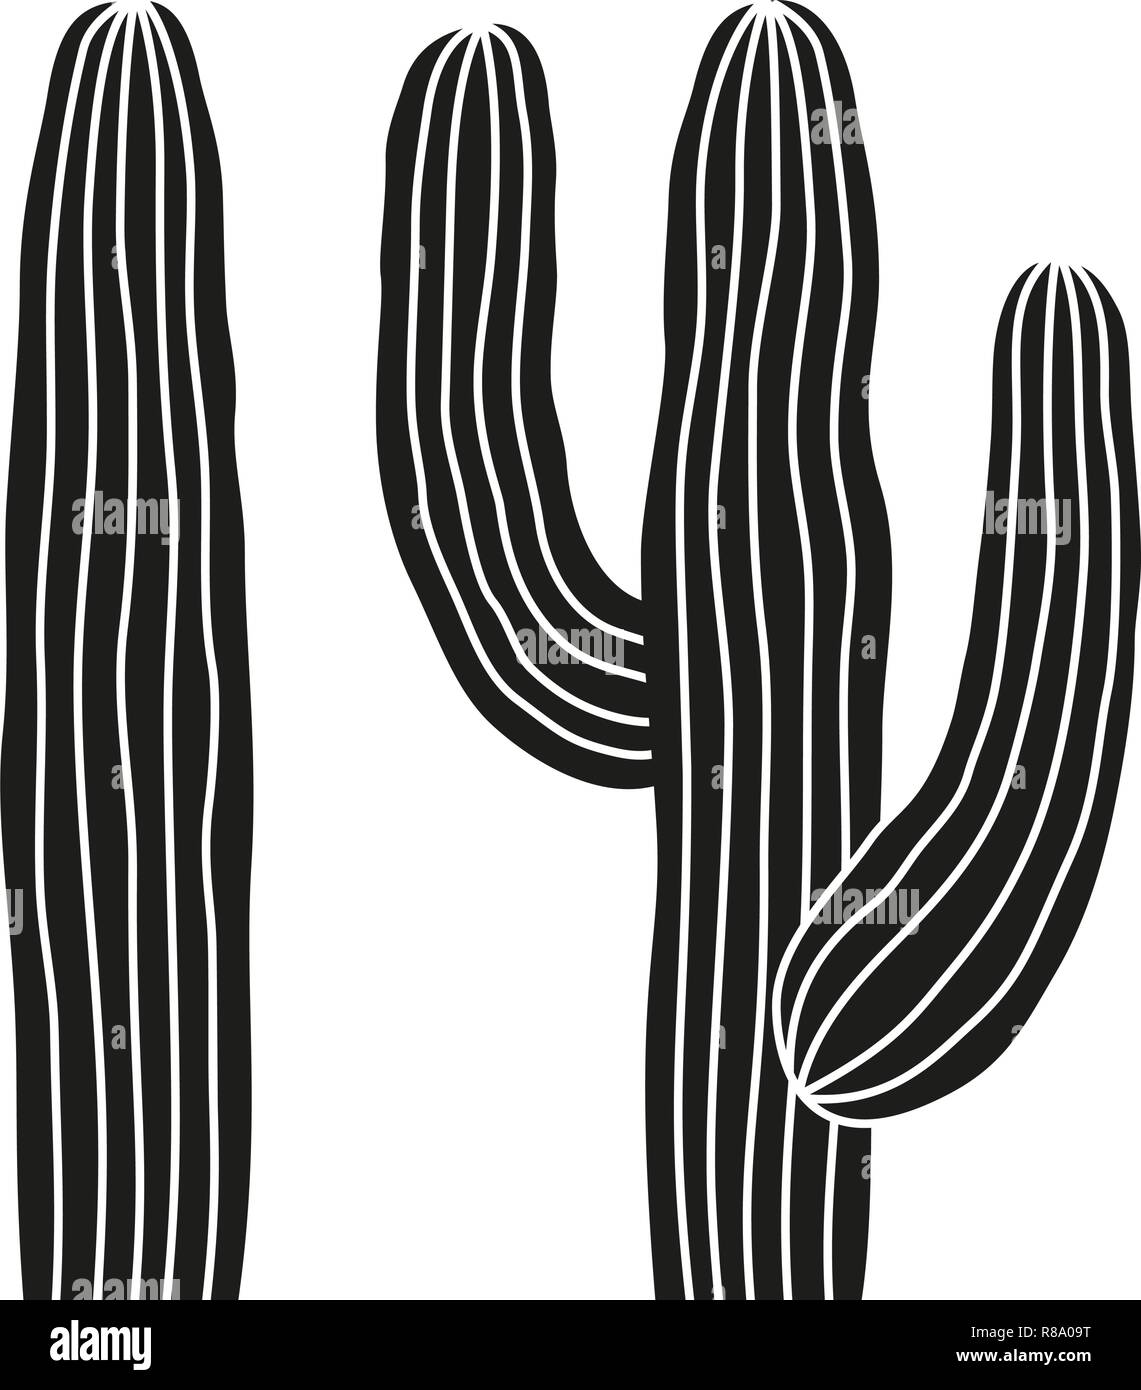 Black and white mexican cactus silhouette. Stock Vector